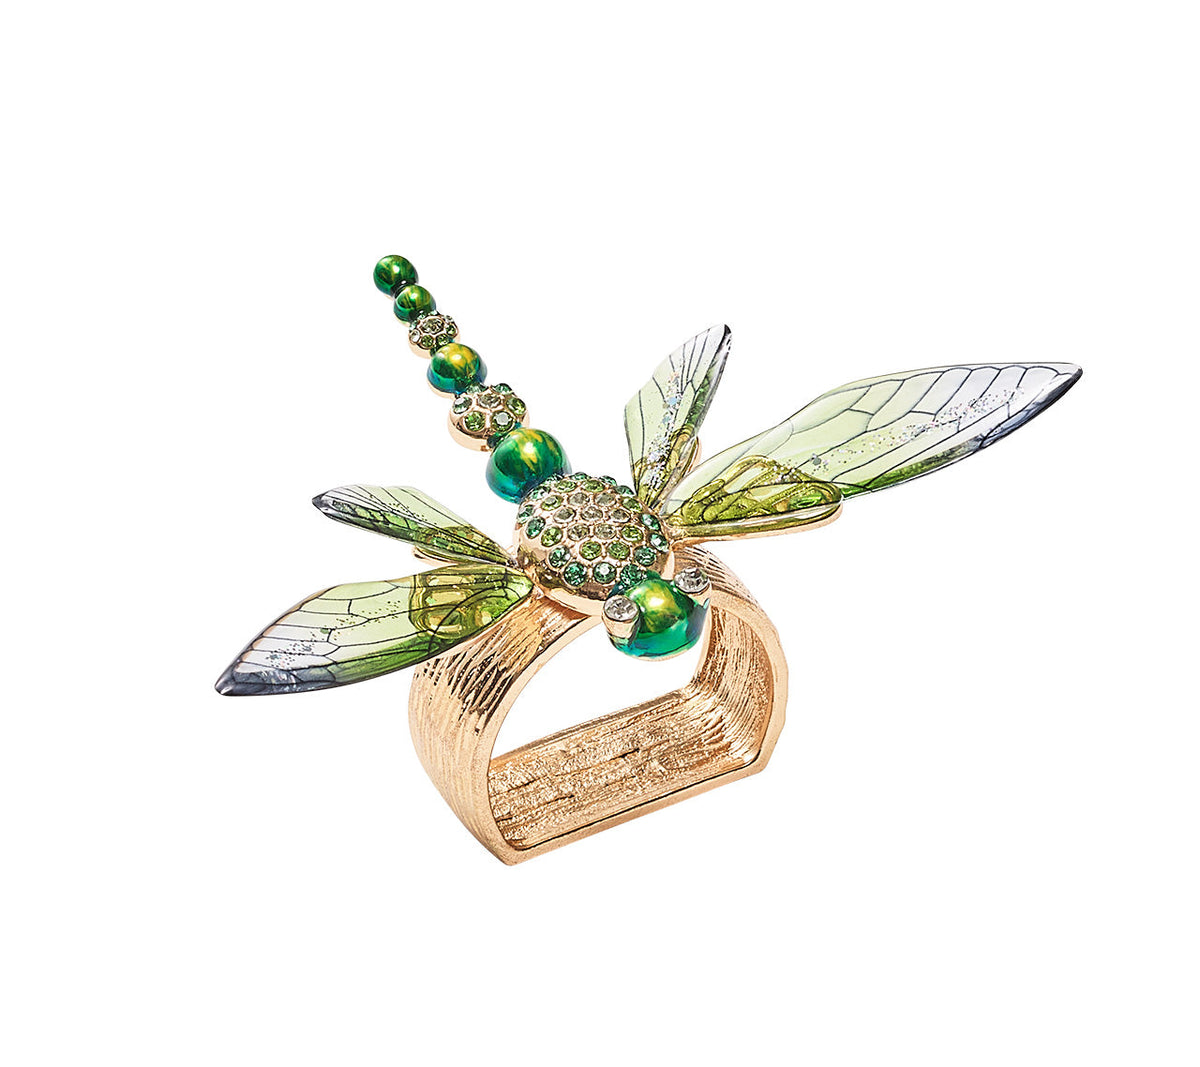 Dragonfly Napkin Ring with green acrylic wings and rhinestoned body